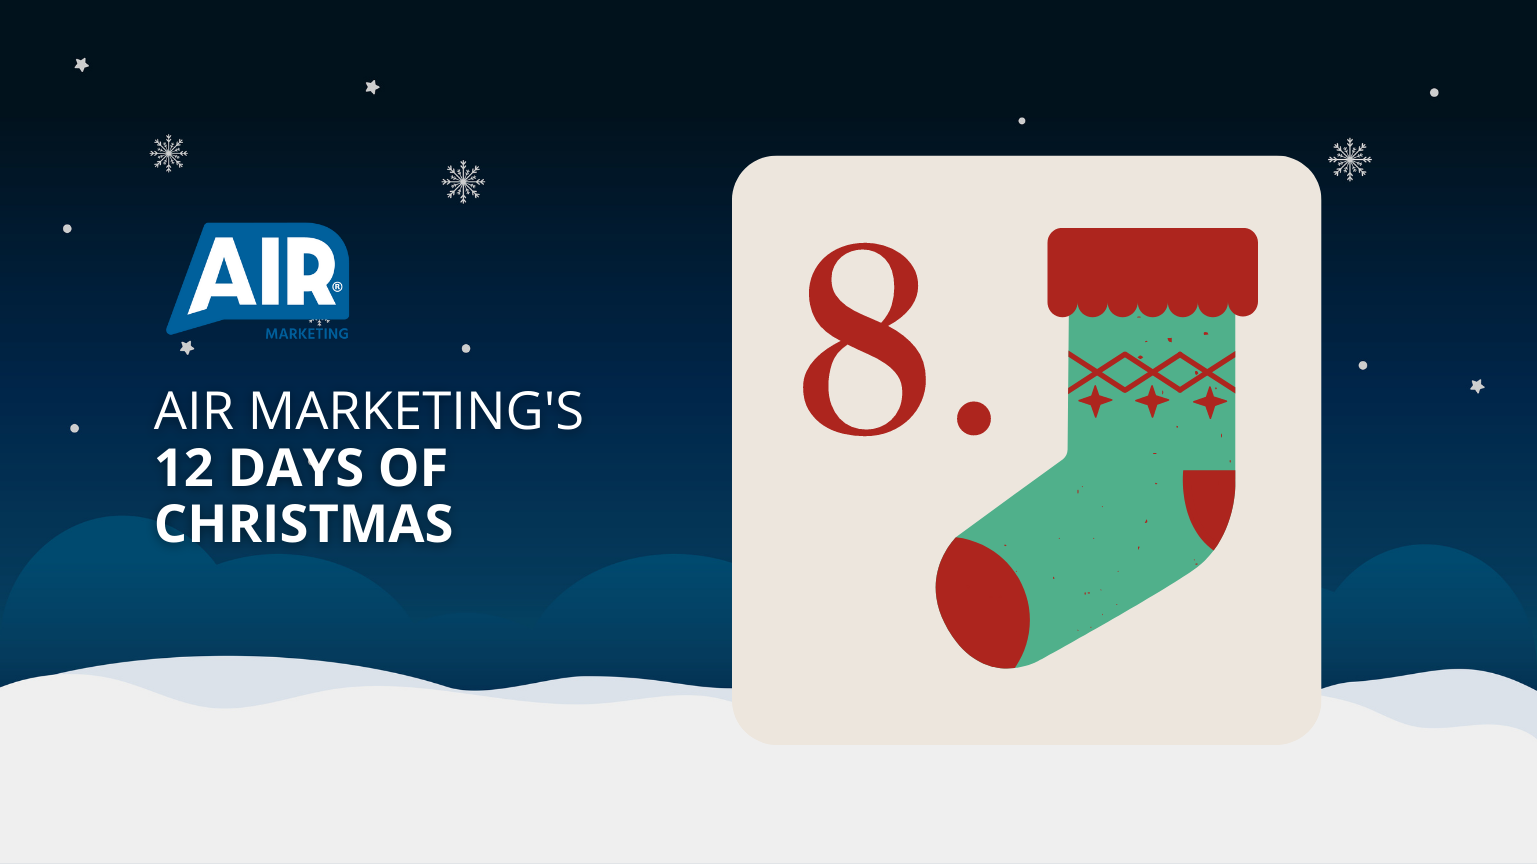 Day 8 of Air Marketing’s 12 Days of Christmas: Unlock The Power of Account Based Marketing (ABM)